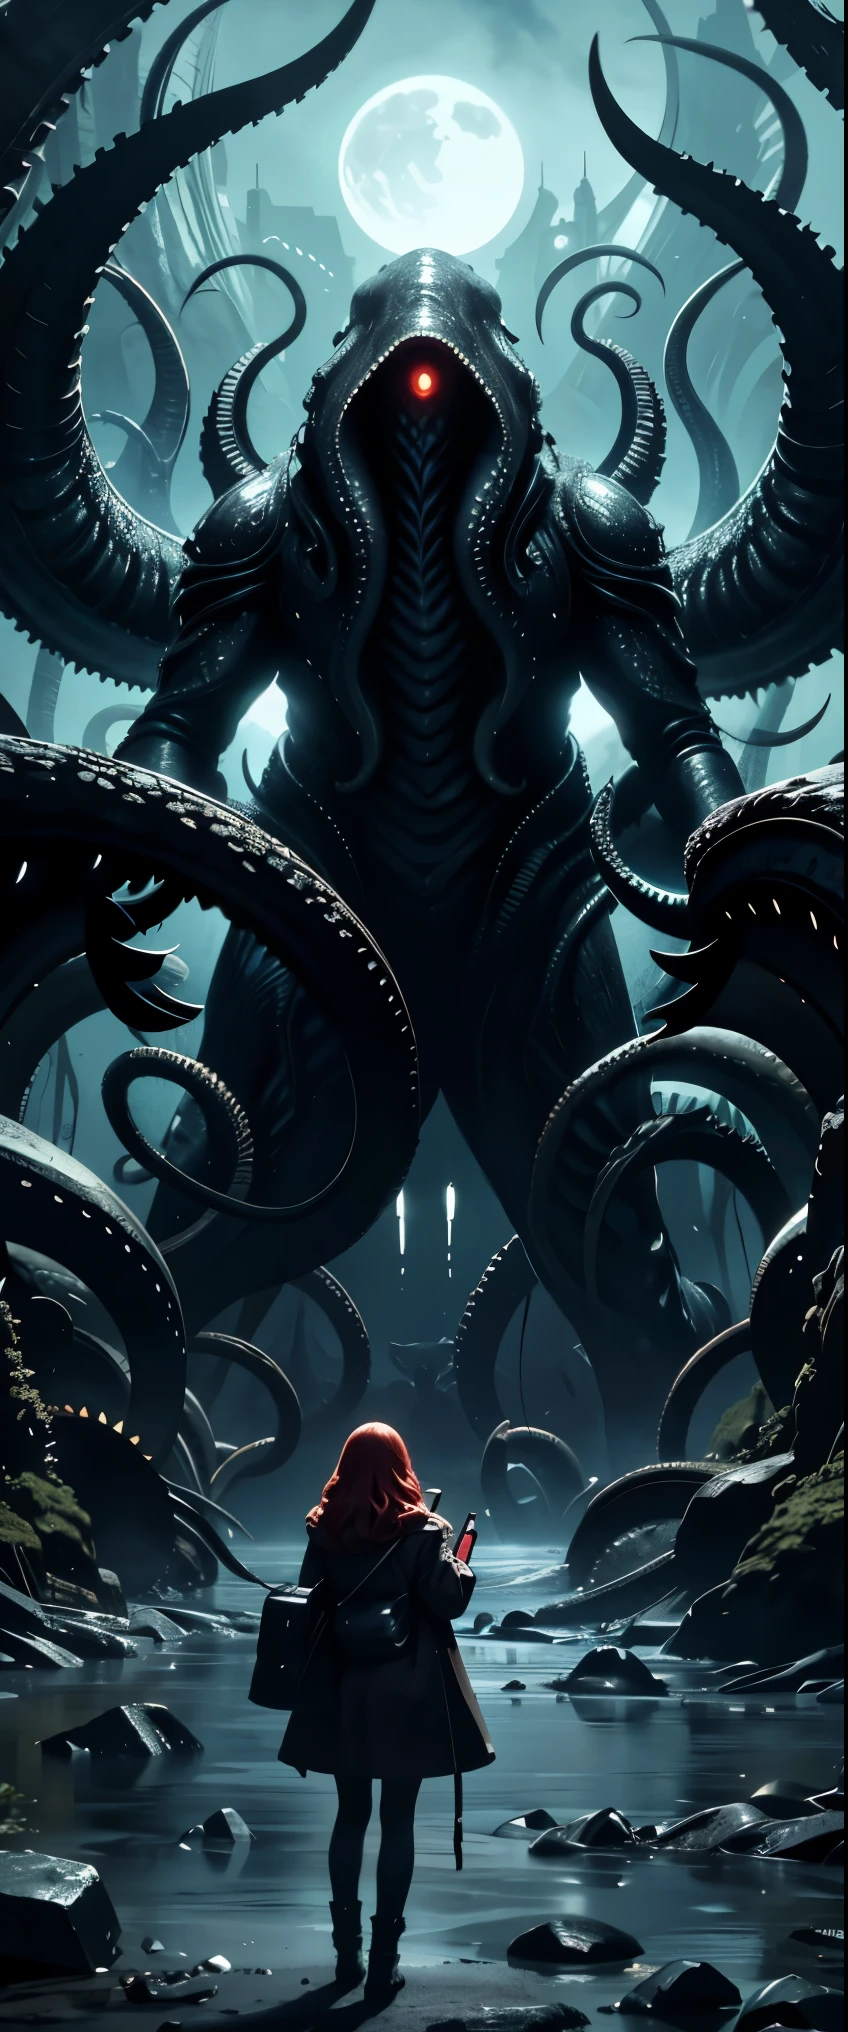 ((masterpiece, highest quality, Highest image quality, High resolution, photorealistic, Raw photo, 8K)), (people taking pictures of a giant creature with their cell phones), Giant female creature, big breasts, big butt, huge tentacles, lovecraftian background, lovecraftian atmosphere, giant cthulhu, huge creature, gigantic cthulhu, giant ethereal creature, eldritch being, lovecraftian monster, giant tentacles, an ominous fantasy illustration, looming creature with a long, nyarlathotep, lovecraftian landscape, 